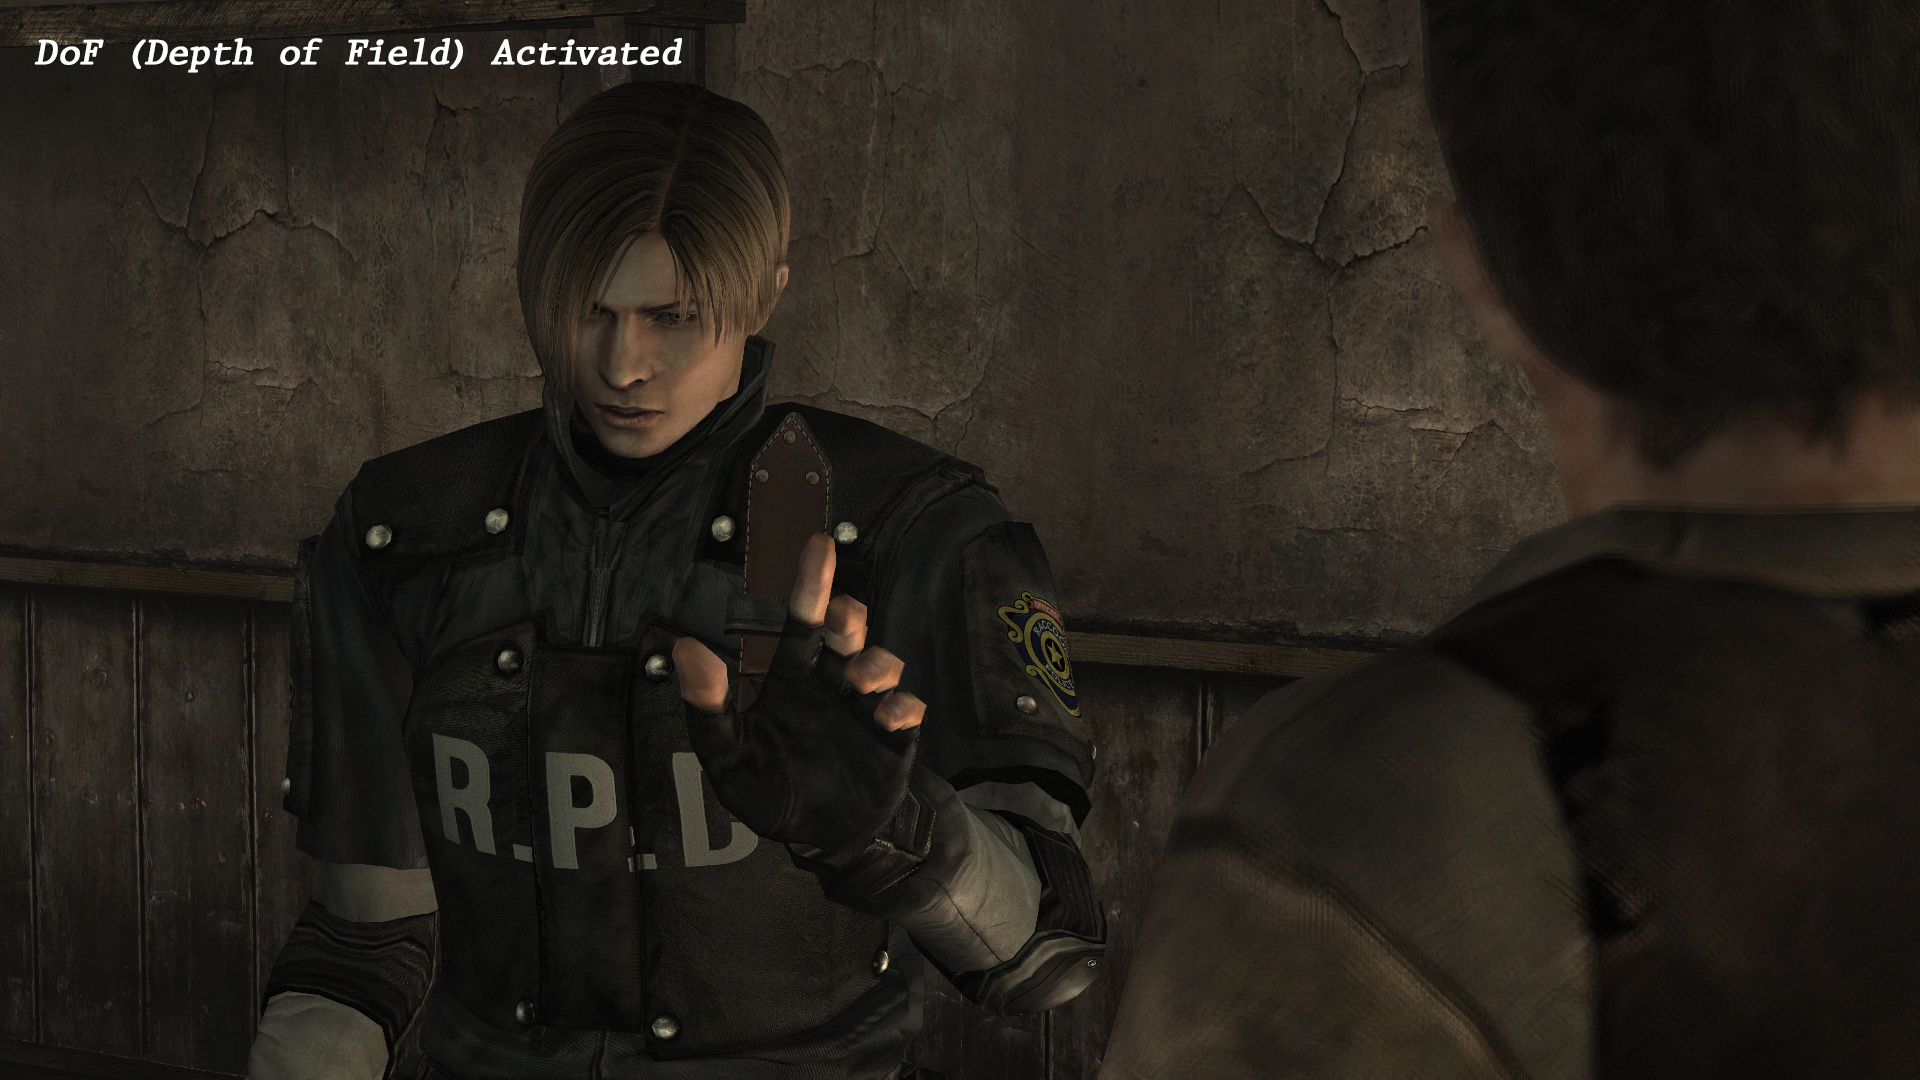 HD 'Resident Evil 4' fan mod is now available after eight years of